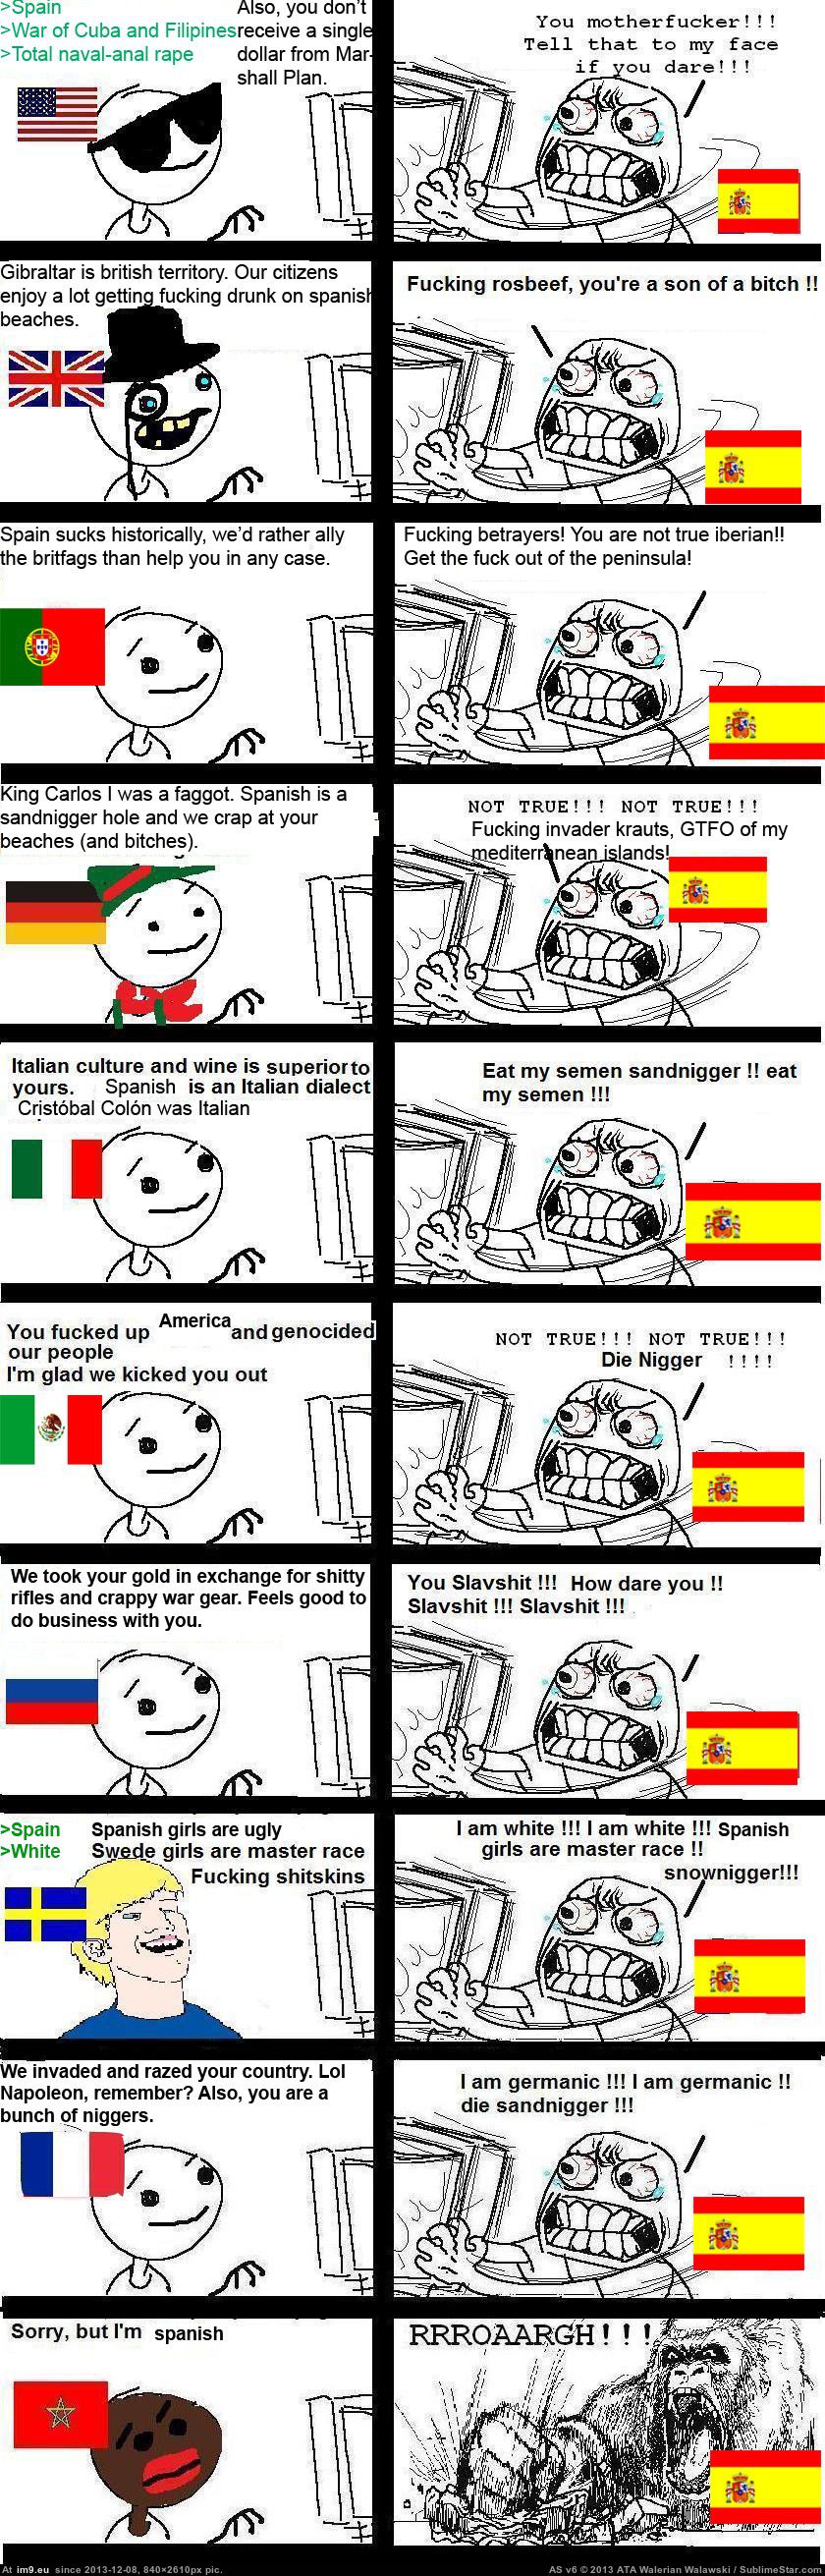 Spain (trolling) (in Trolling different Nations (Countries))